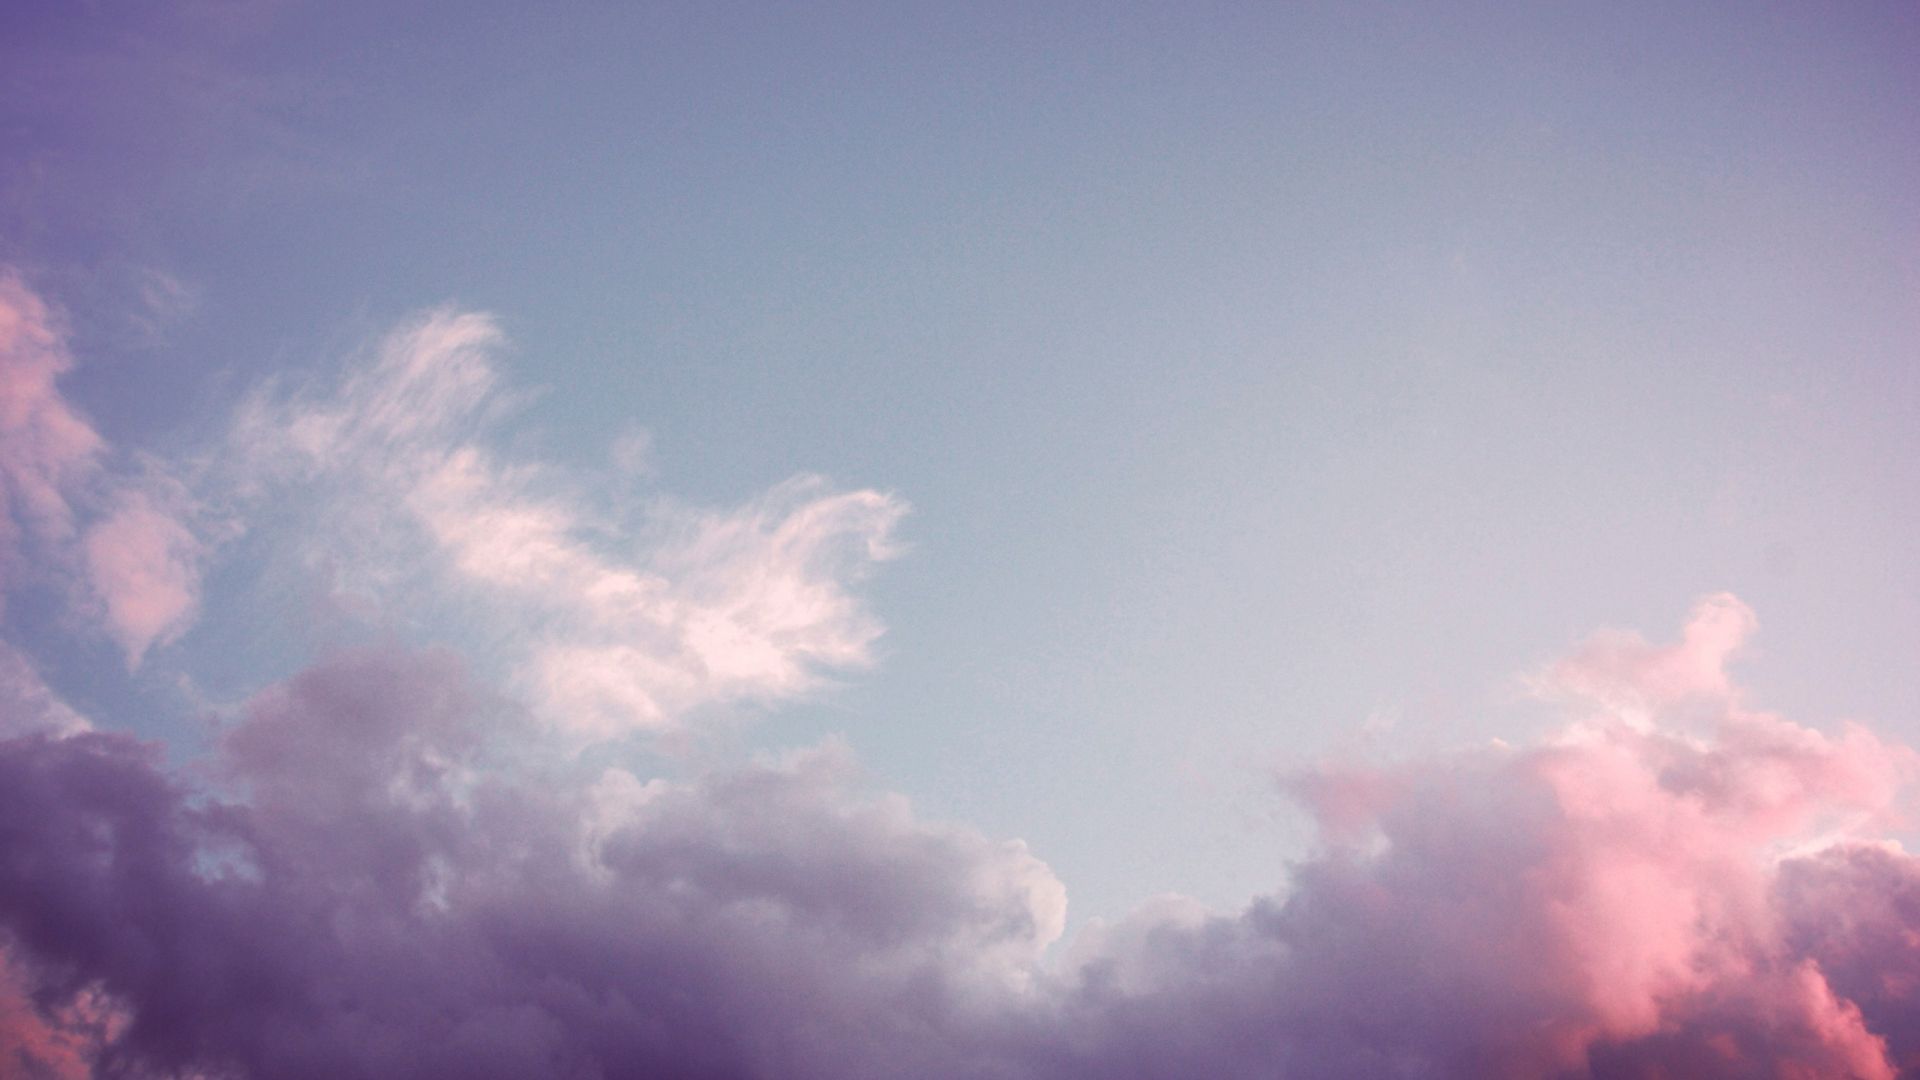 Aesthetic Cloud Wallpaper Free Aesthetic Cloud Background